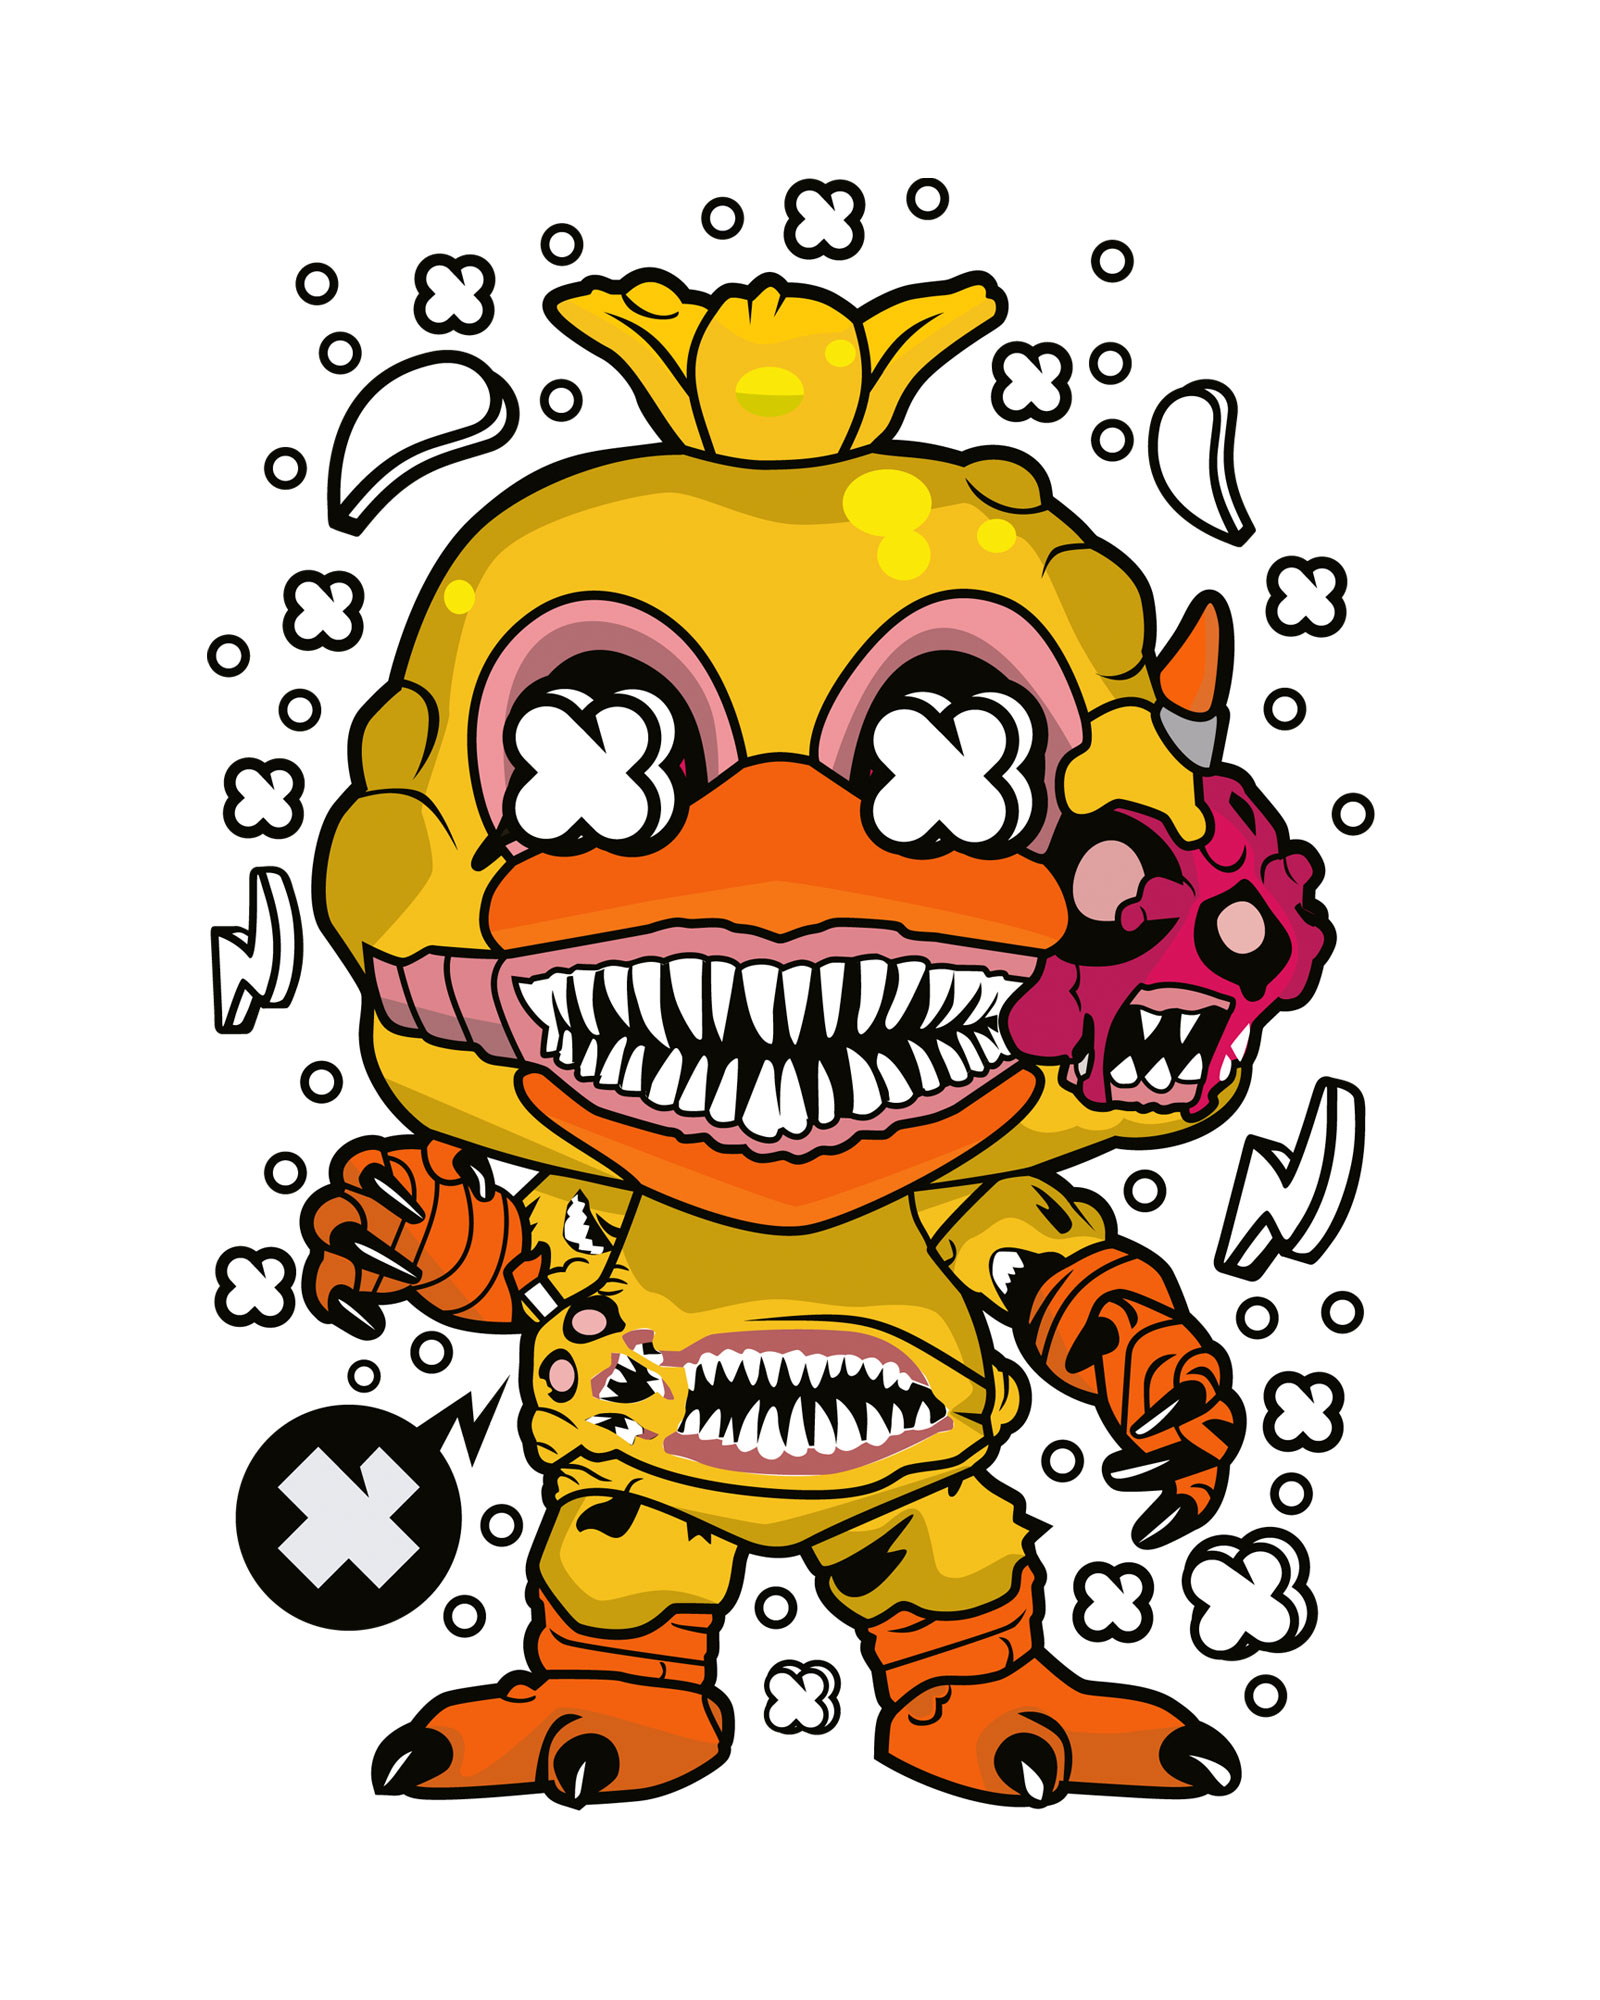 Twisted chica design white